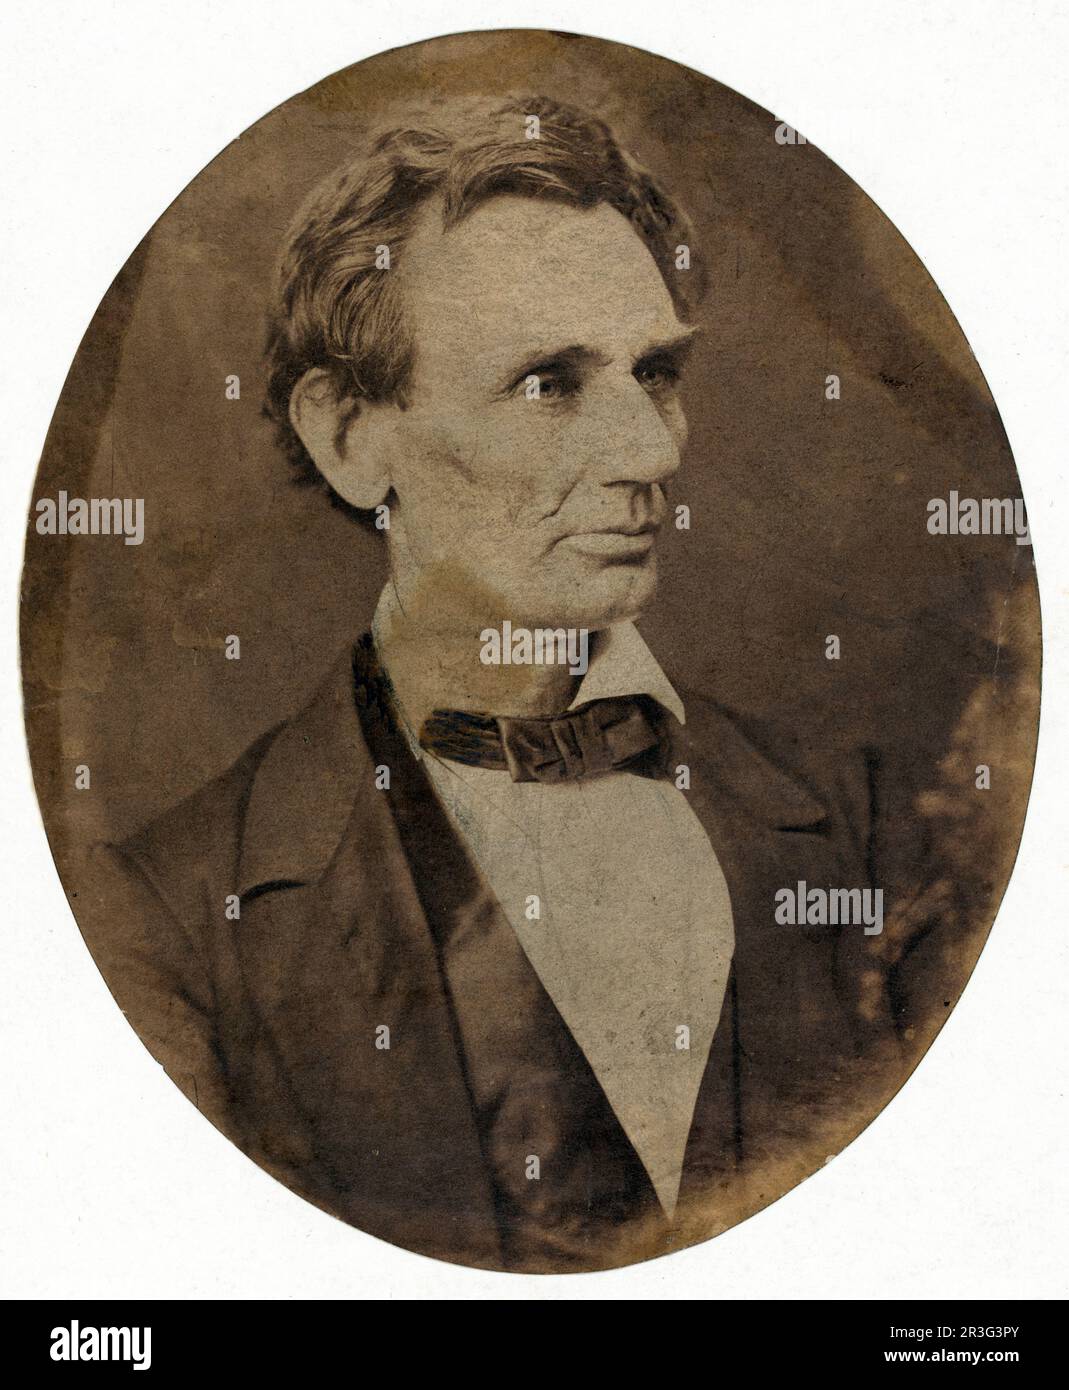 Head-and-shoulders portrait of Abraham Lincoln, candidate for U.S. president, 1860. Stock Photo